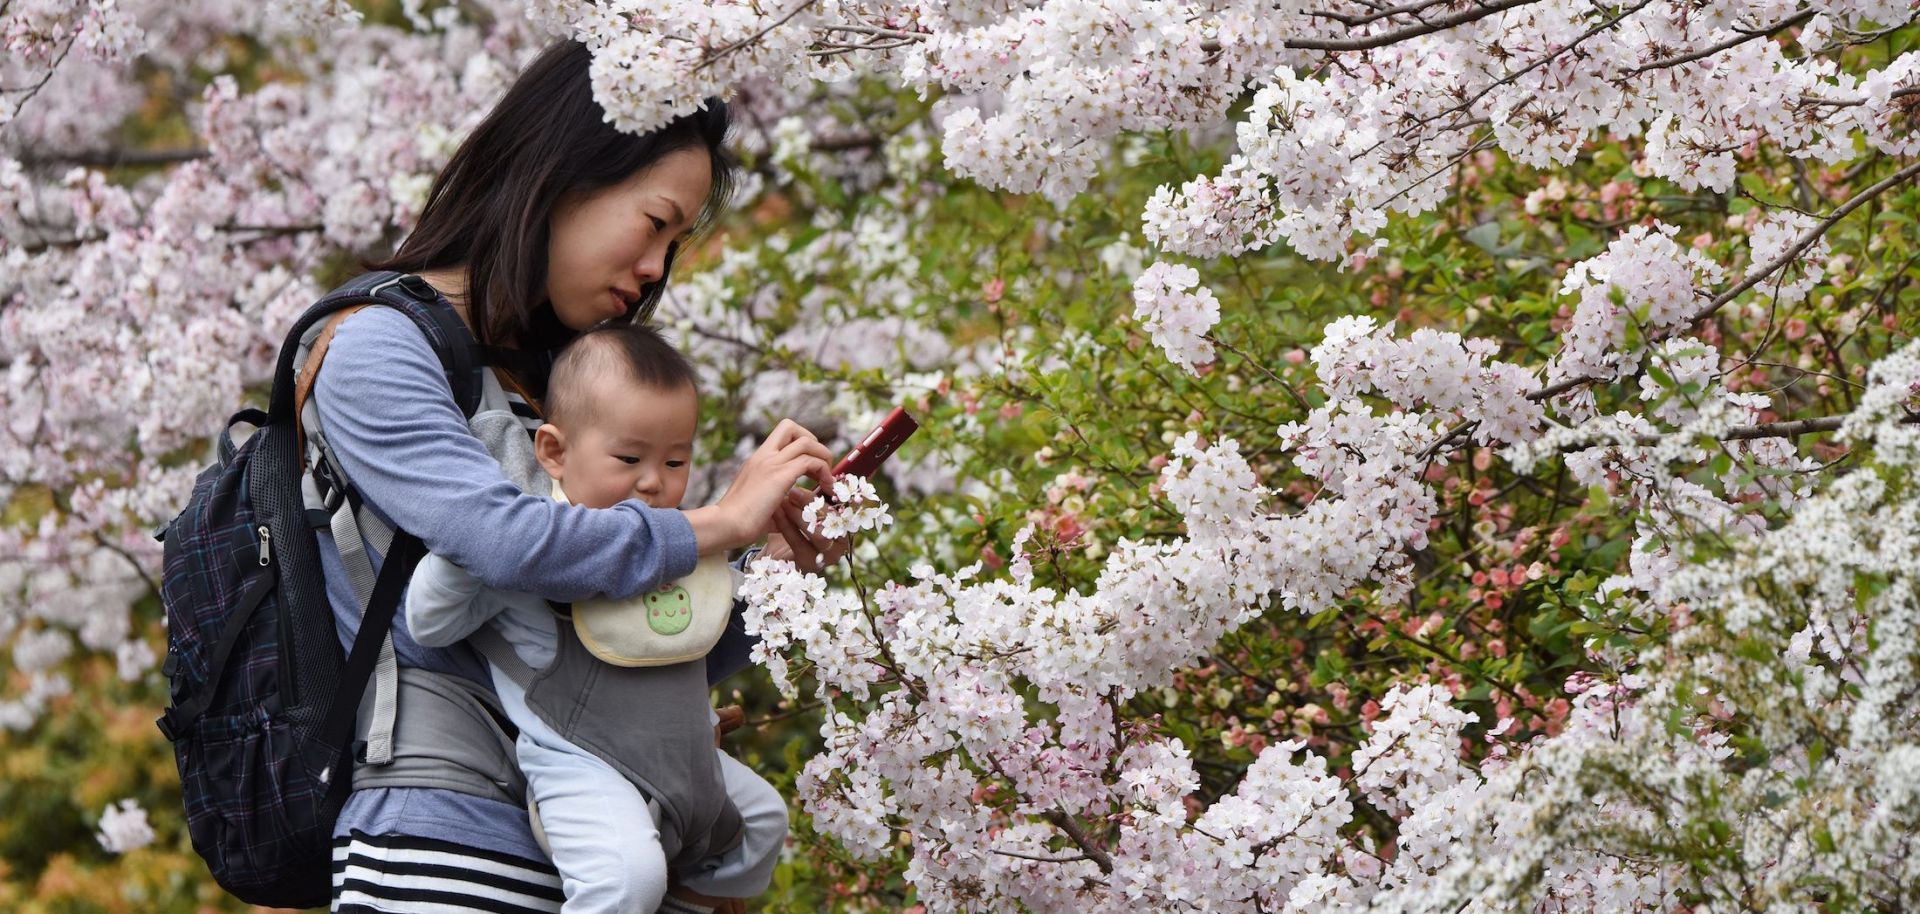 A mother takes photos with her baby under cherry blossoms in full bloom in Tokyo, Japan, on March 29, 2015.